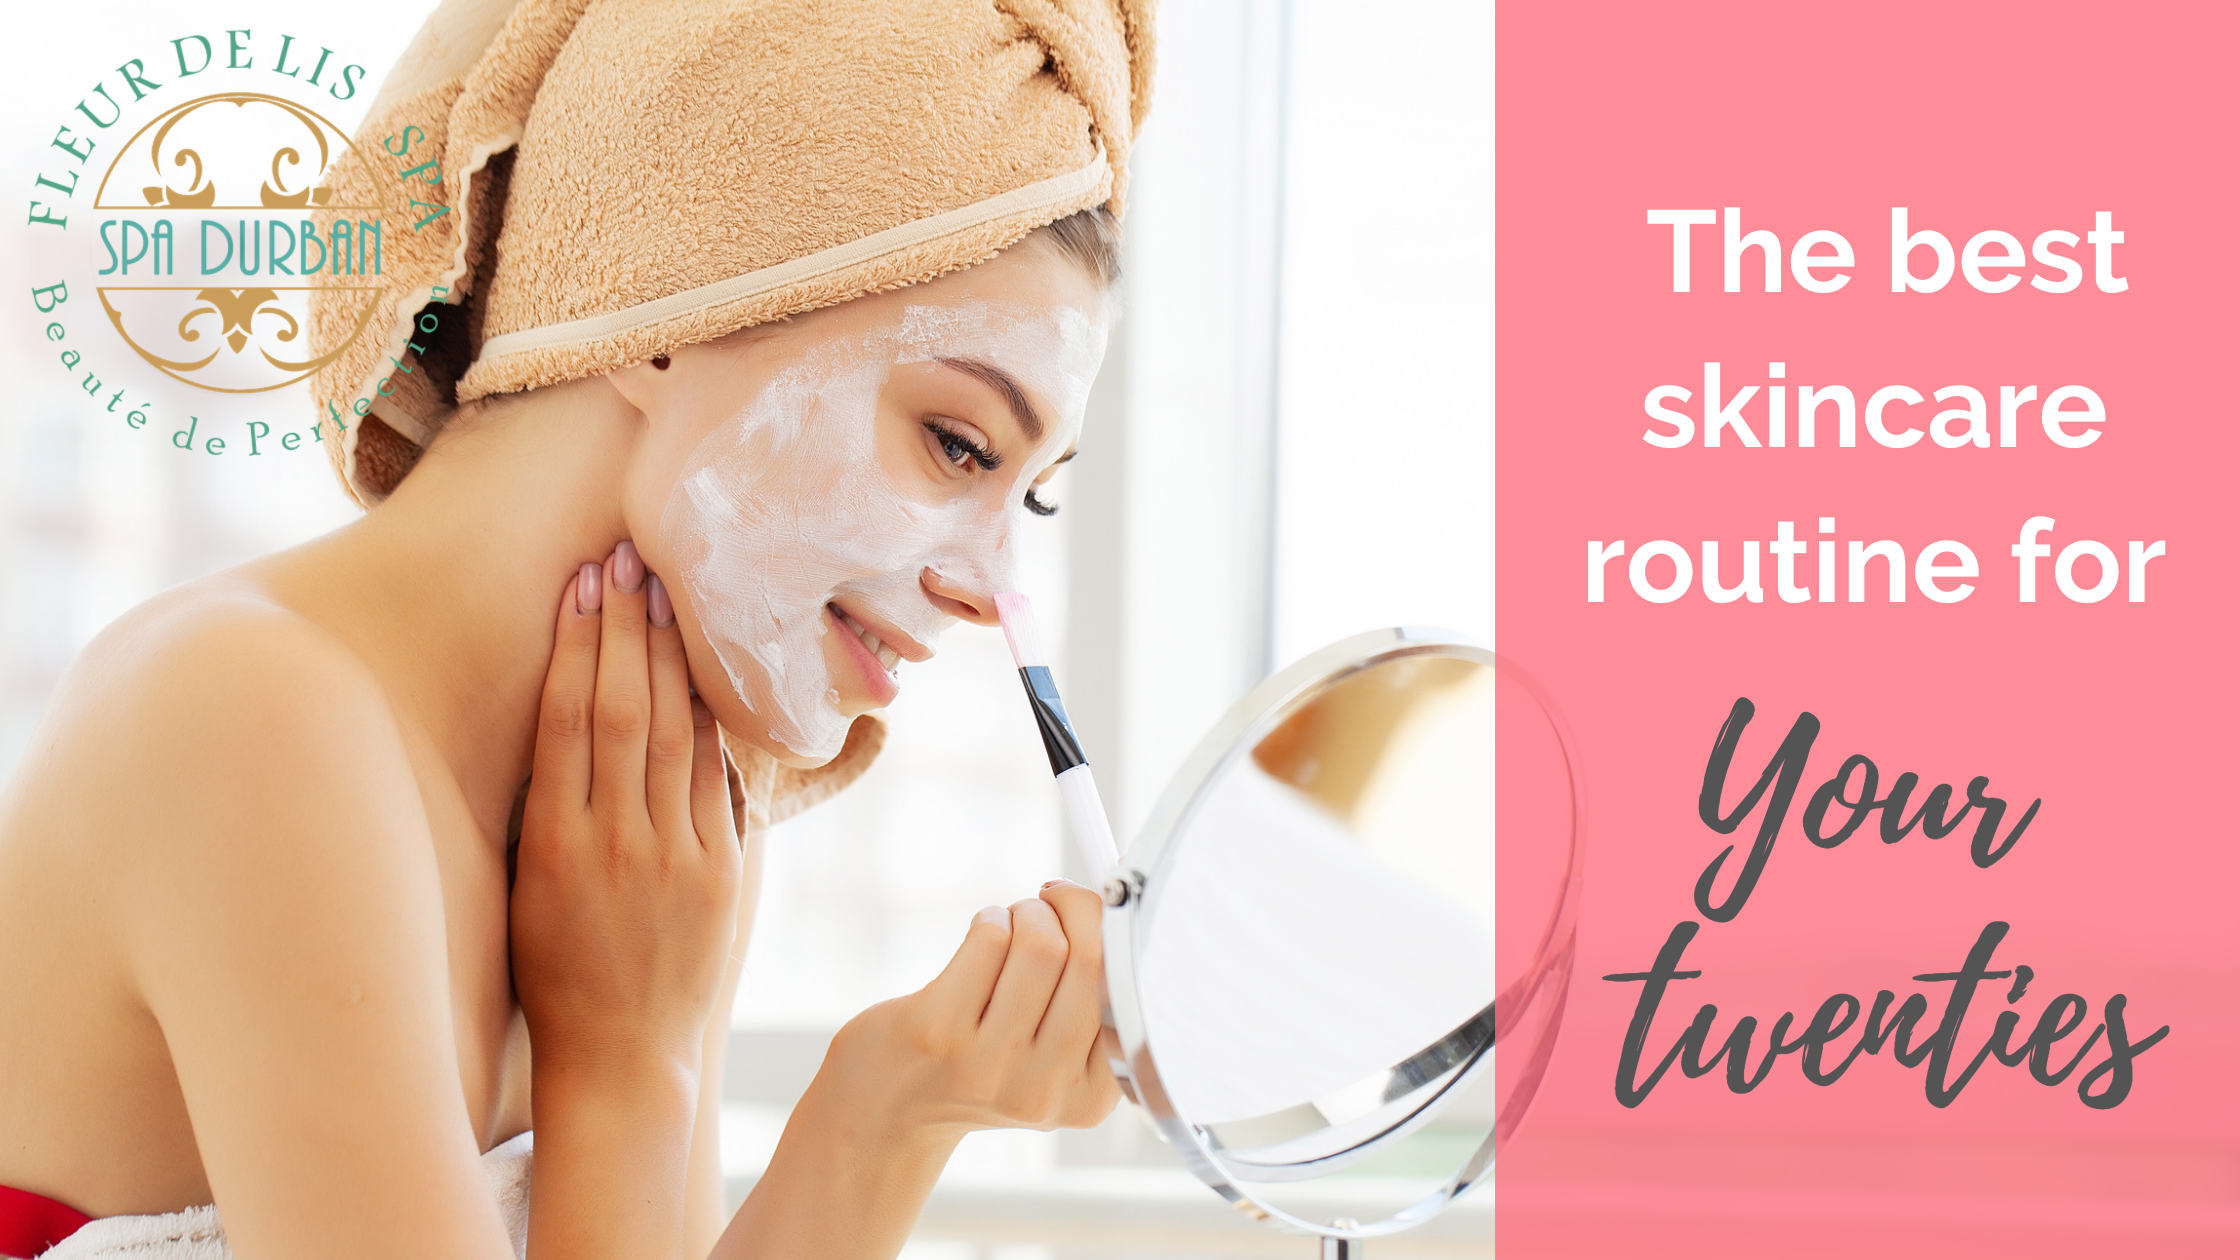 The Best Skincare Routine for Your Twenties